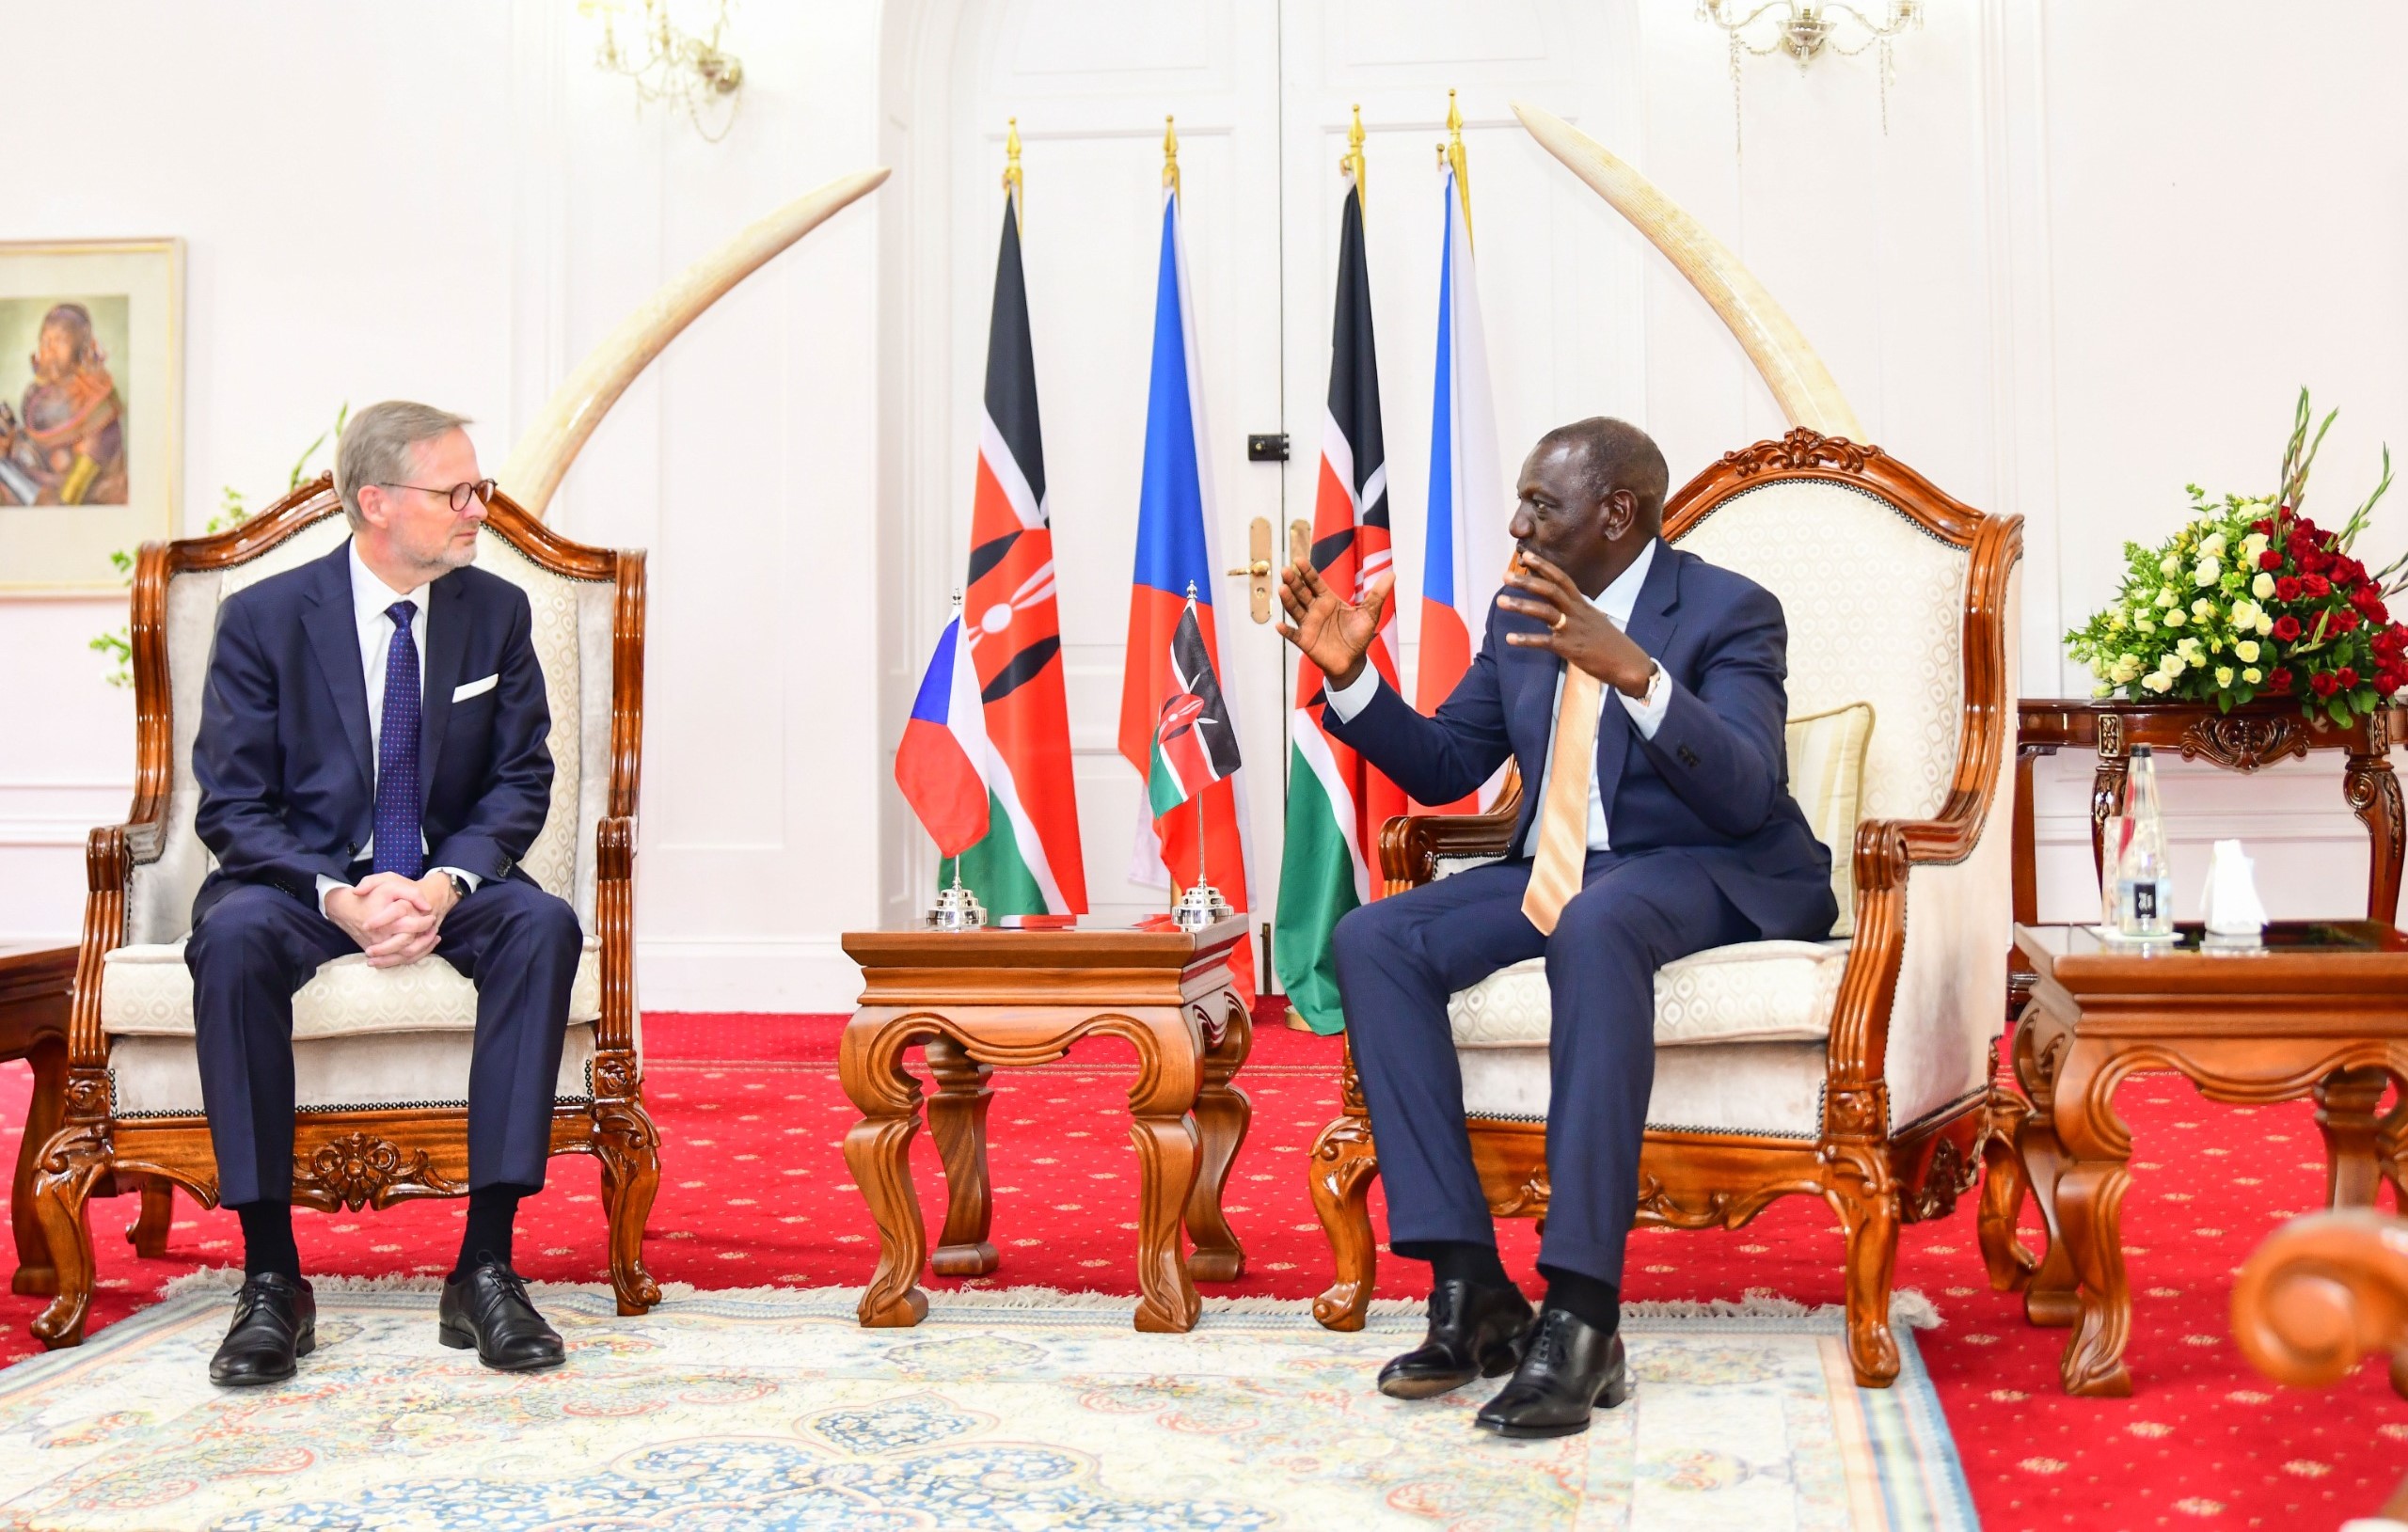 Ruto Hosts Prime Minister Petr Fiala of the Czech Republic at State House